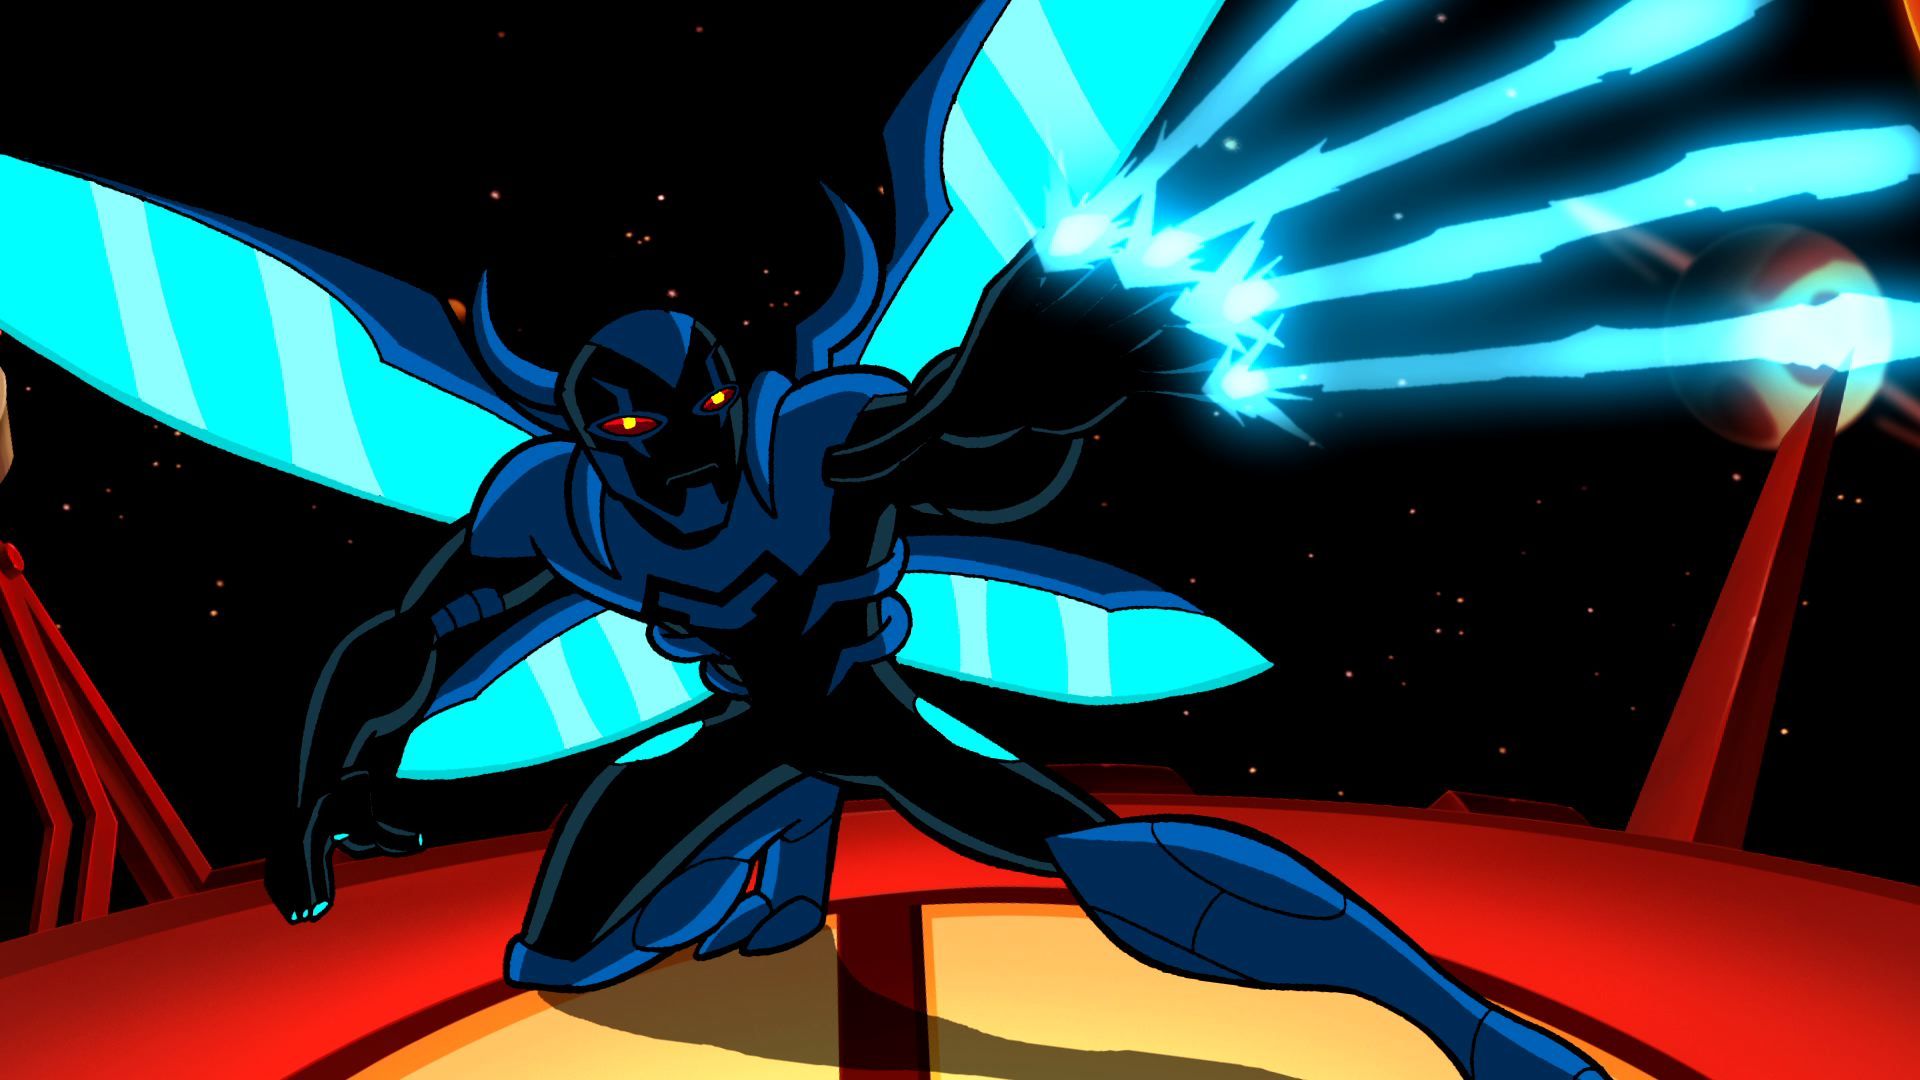 Dc And Warner Bros To Appeal To The Latino Market With Blue Beetle Film Mxdwn Movies